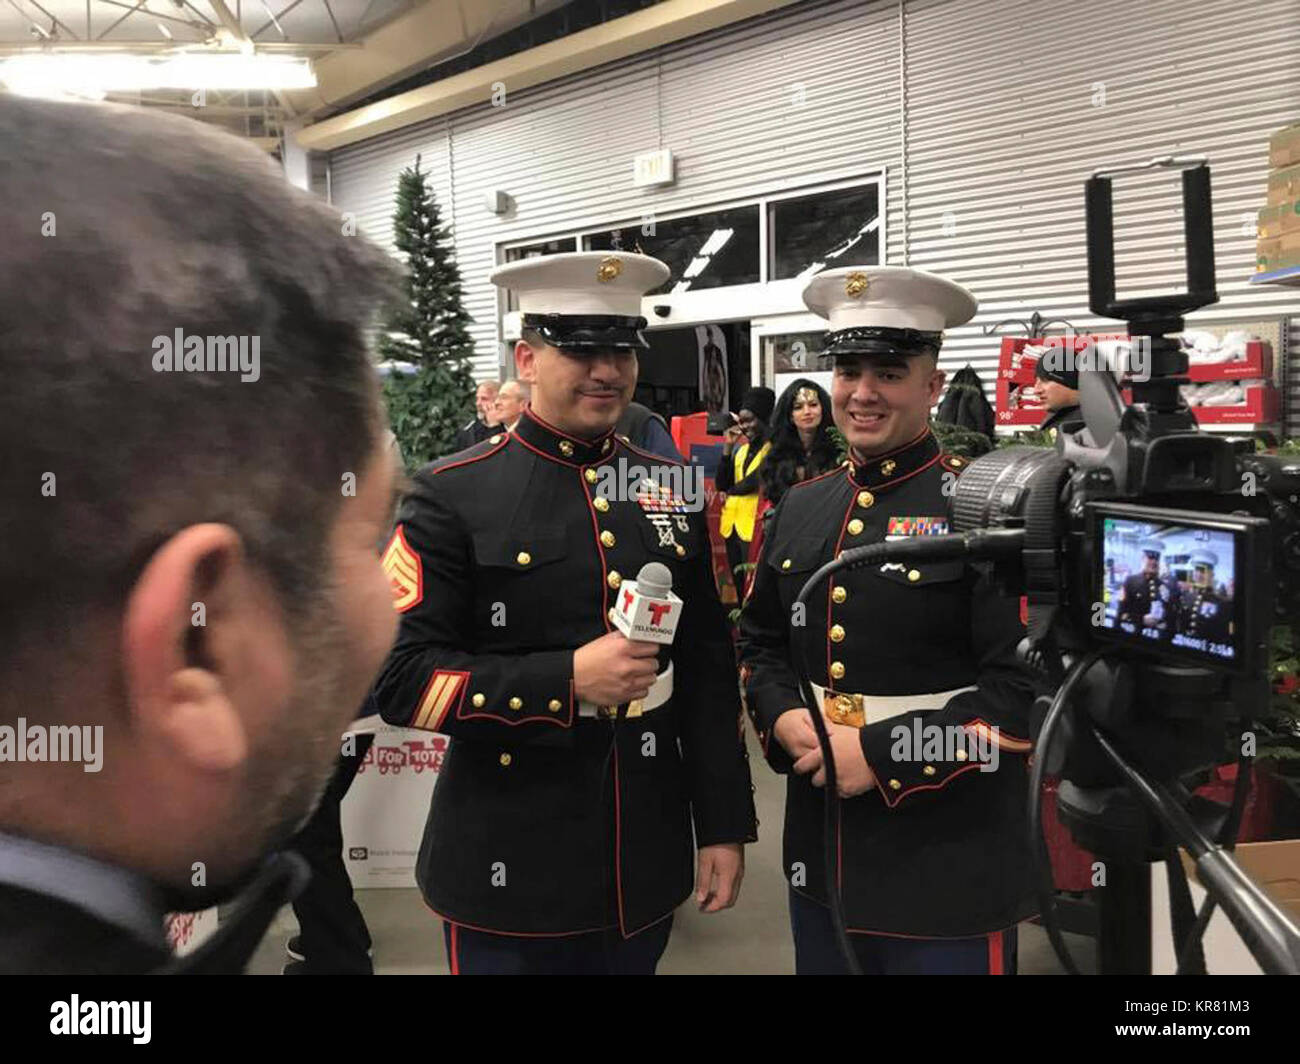 U.S. Marine Corps Staff Sgt. Mario Roman, Staff Non Commissioned Officer at Recruiting Sub-station Sandy, and Staff Sgt. Robert Dohse, Salt Lake City Toys for Tots coordinator at Marine Corps Reserve Company F, conduct and interview with a local television station at the 17th Annual Toy Shop in Salt Lake City, Utah, Dec. 5, 2017.  The mission of the U. S. Marine Corps Reserve Toys for Tots Program is to collect new, unwrapped toys during October, November and December each year, and distribute those toys as Christmas gifts to less fortunate children in the community in which the campaign is co Stock Photo